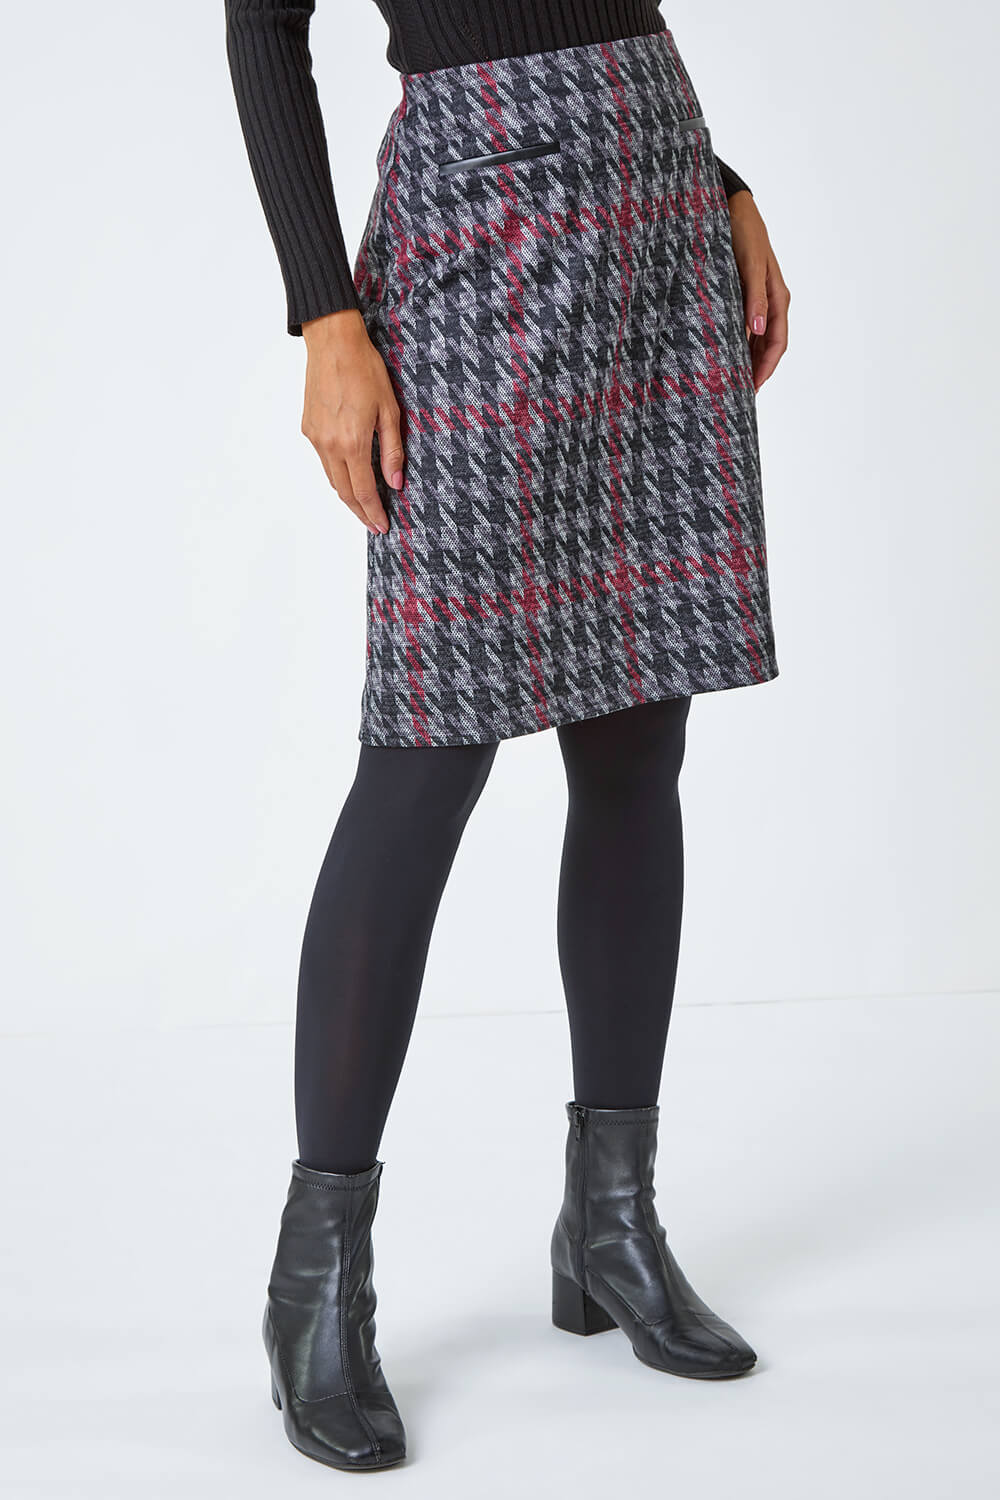 Red Houndstooth Stretch Pencil Skirt, Image 4 of 5